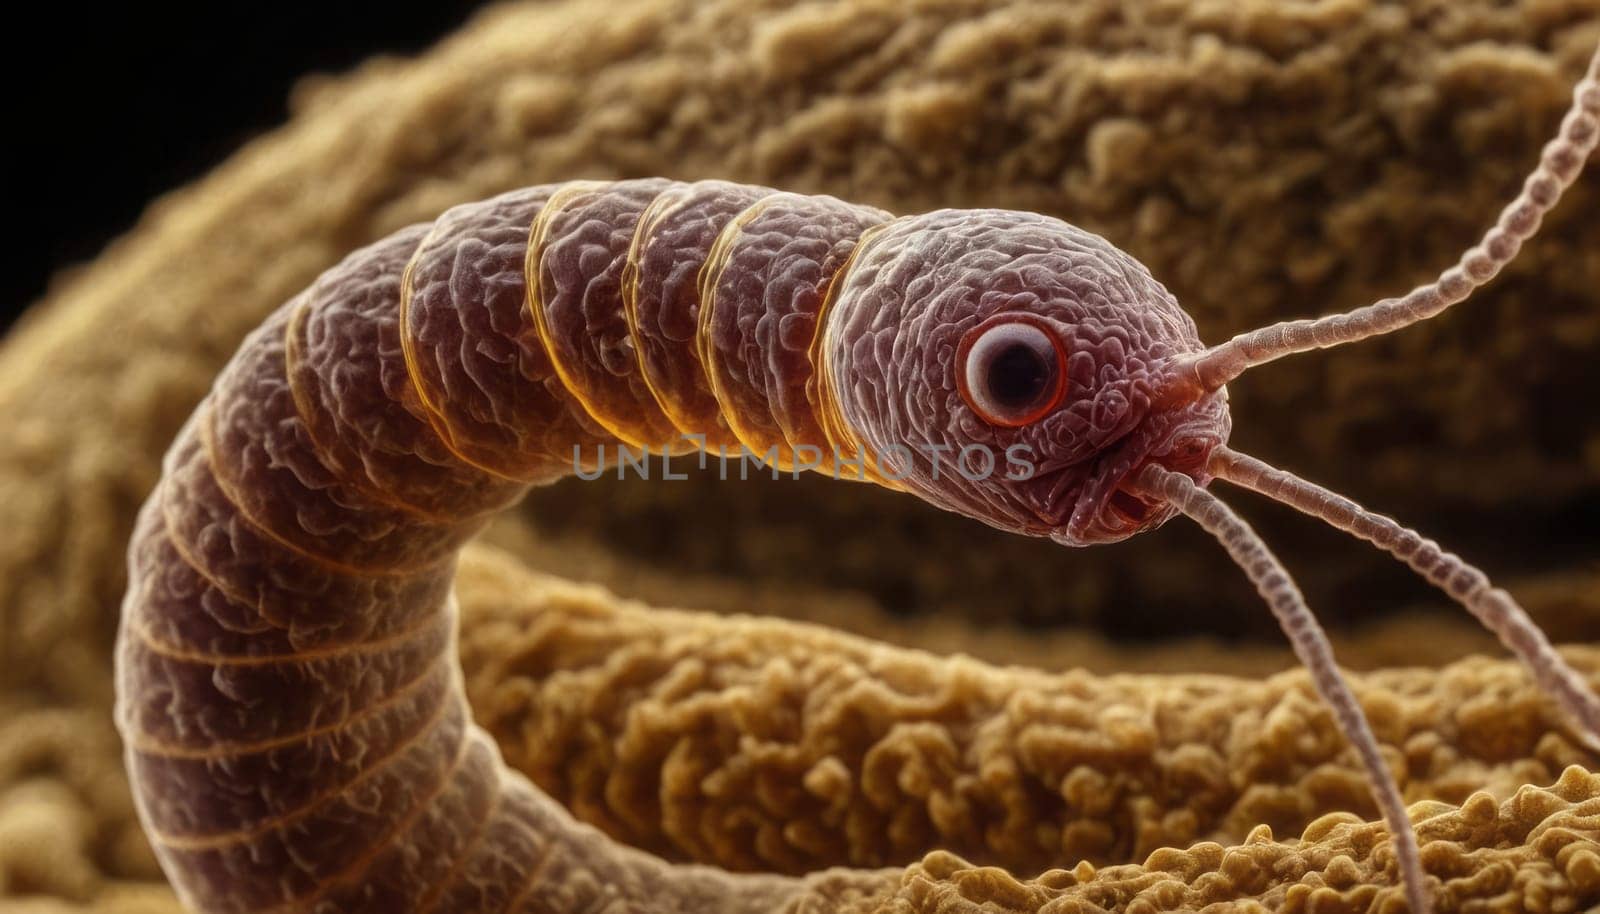 Detailed View of a Nematode by nkotlyar